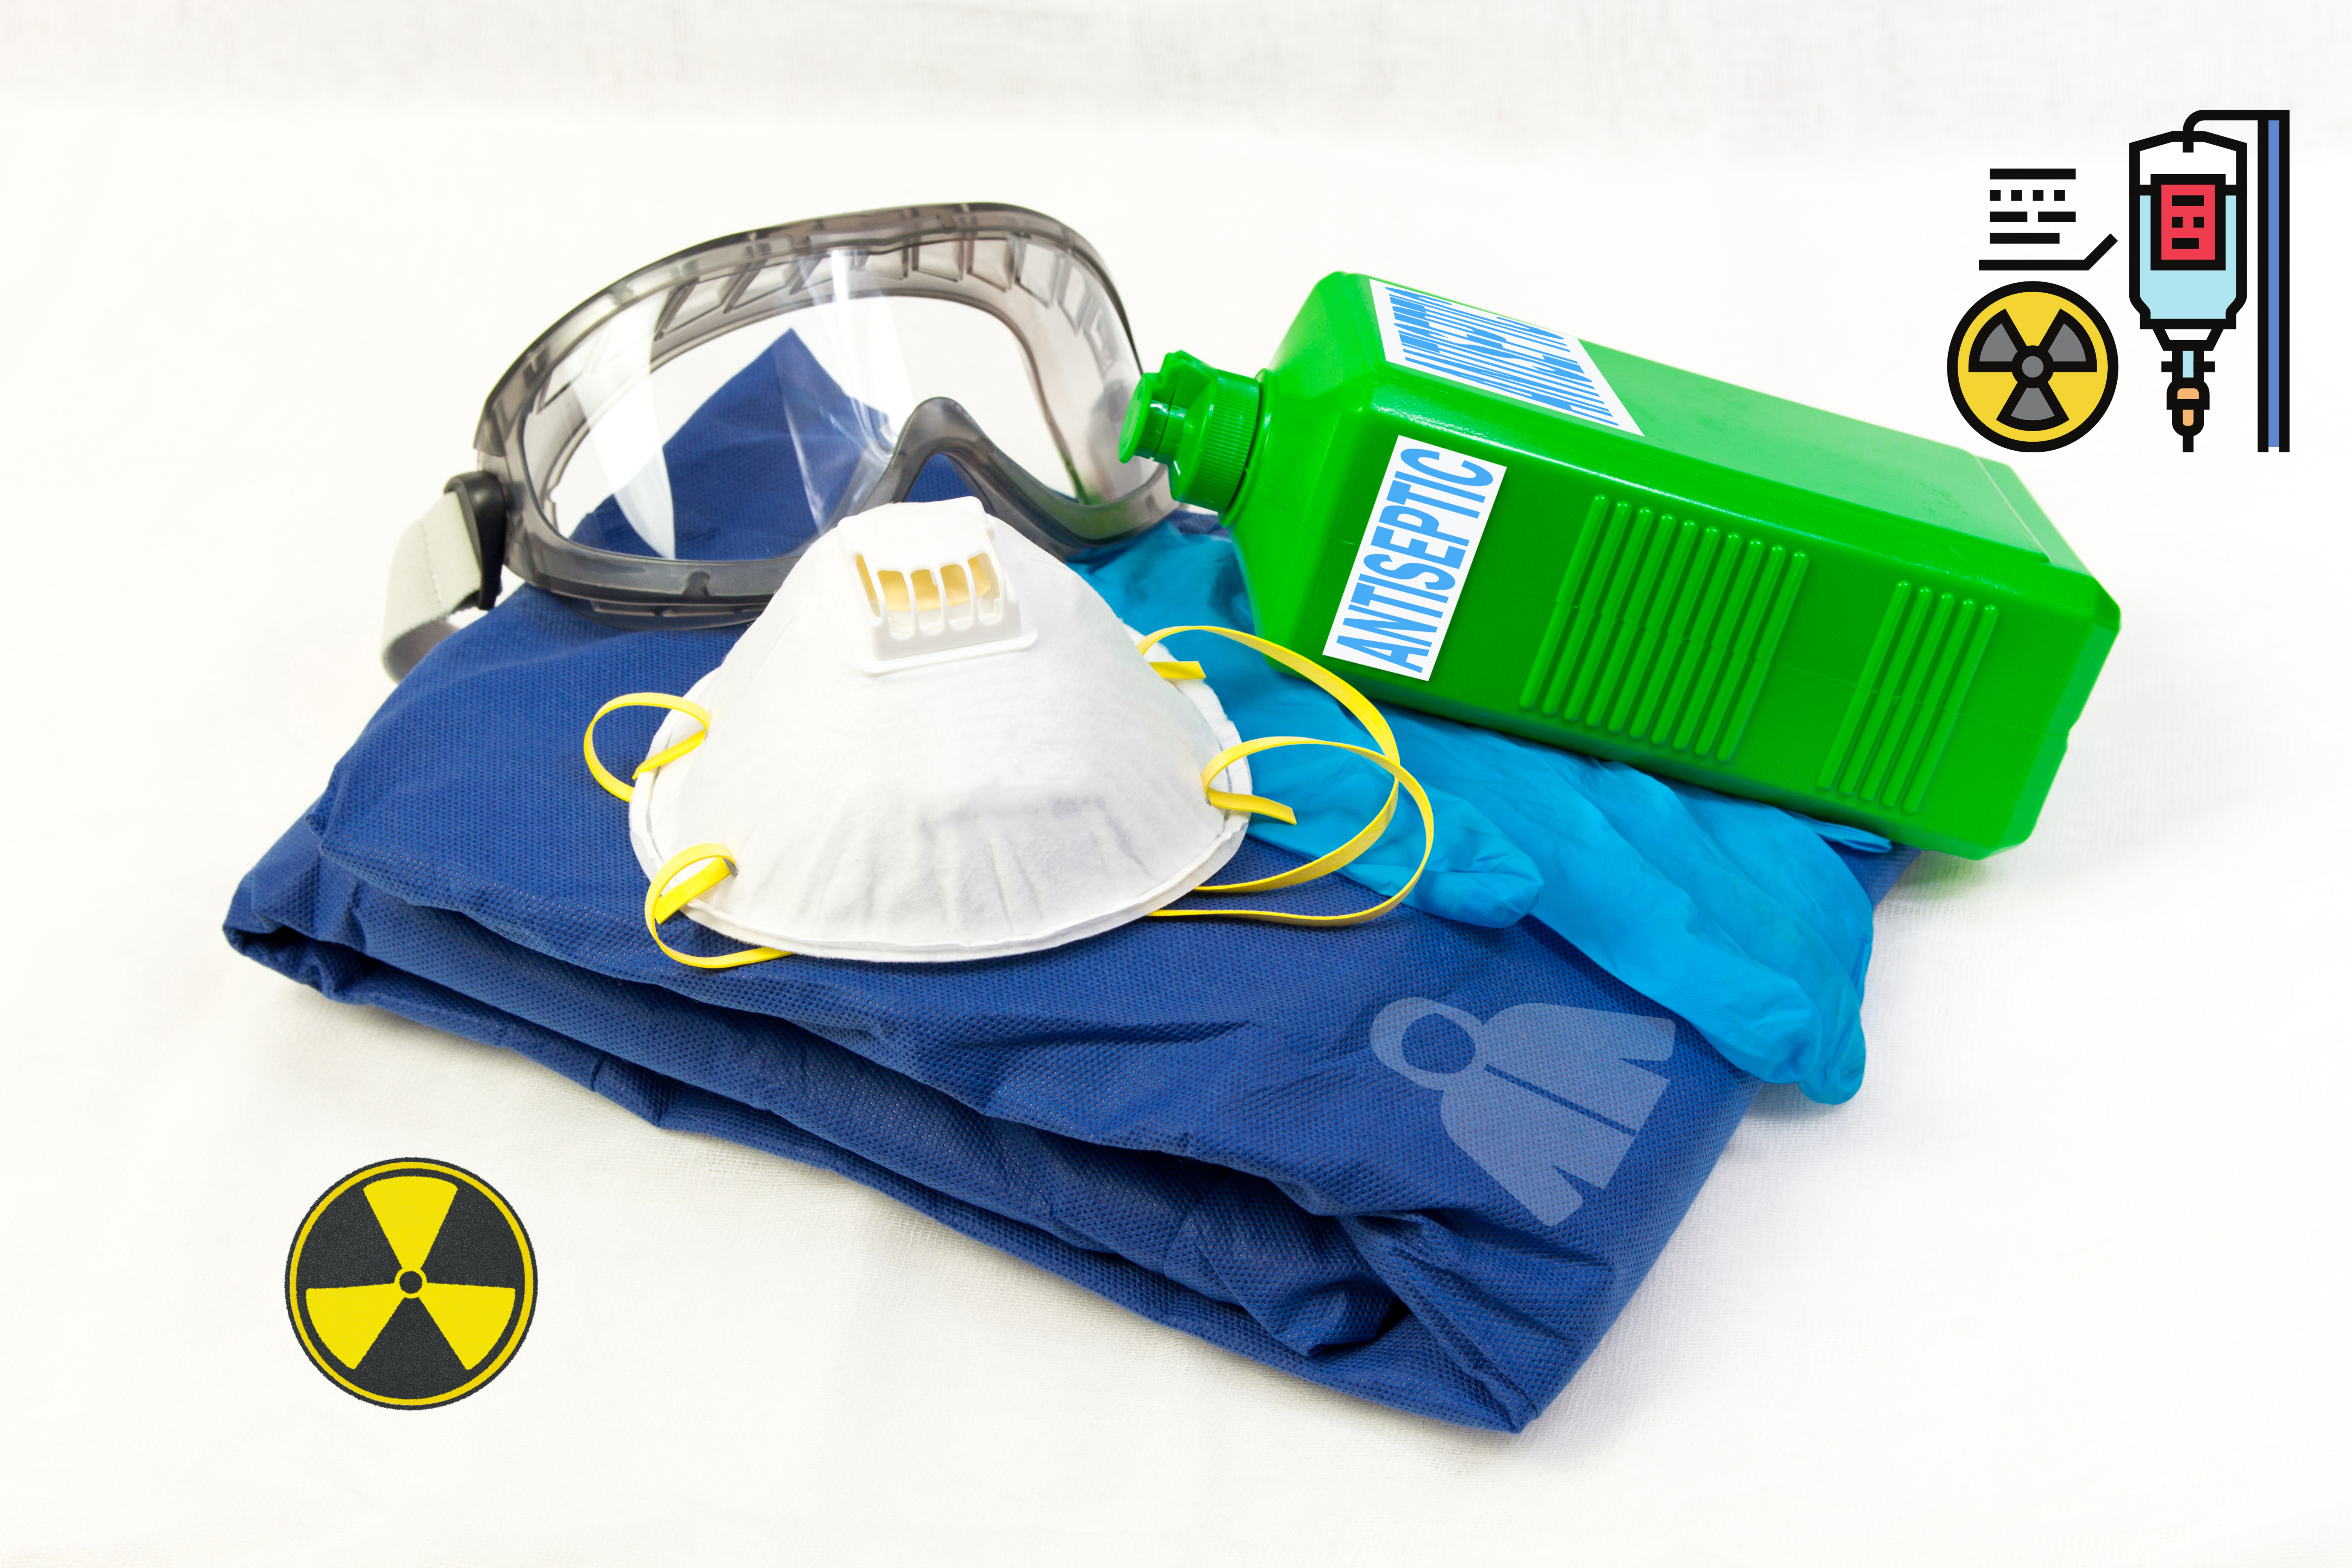 Radiology Personal Protective Equipment